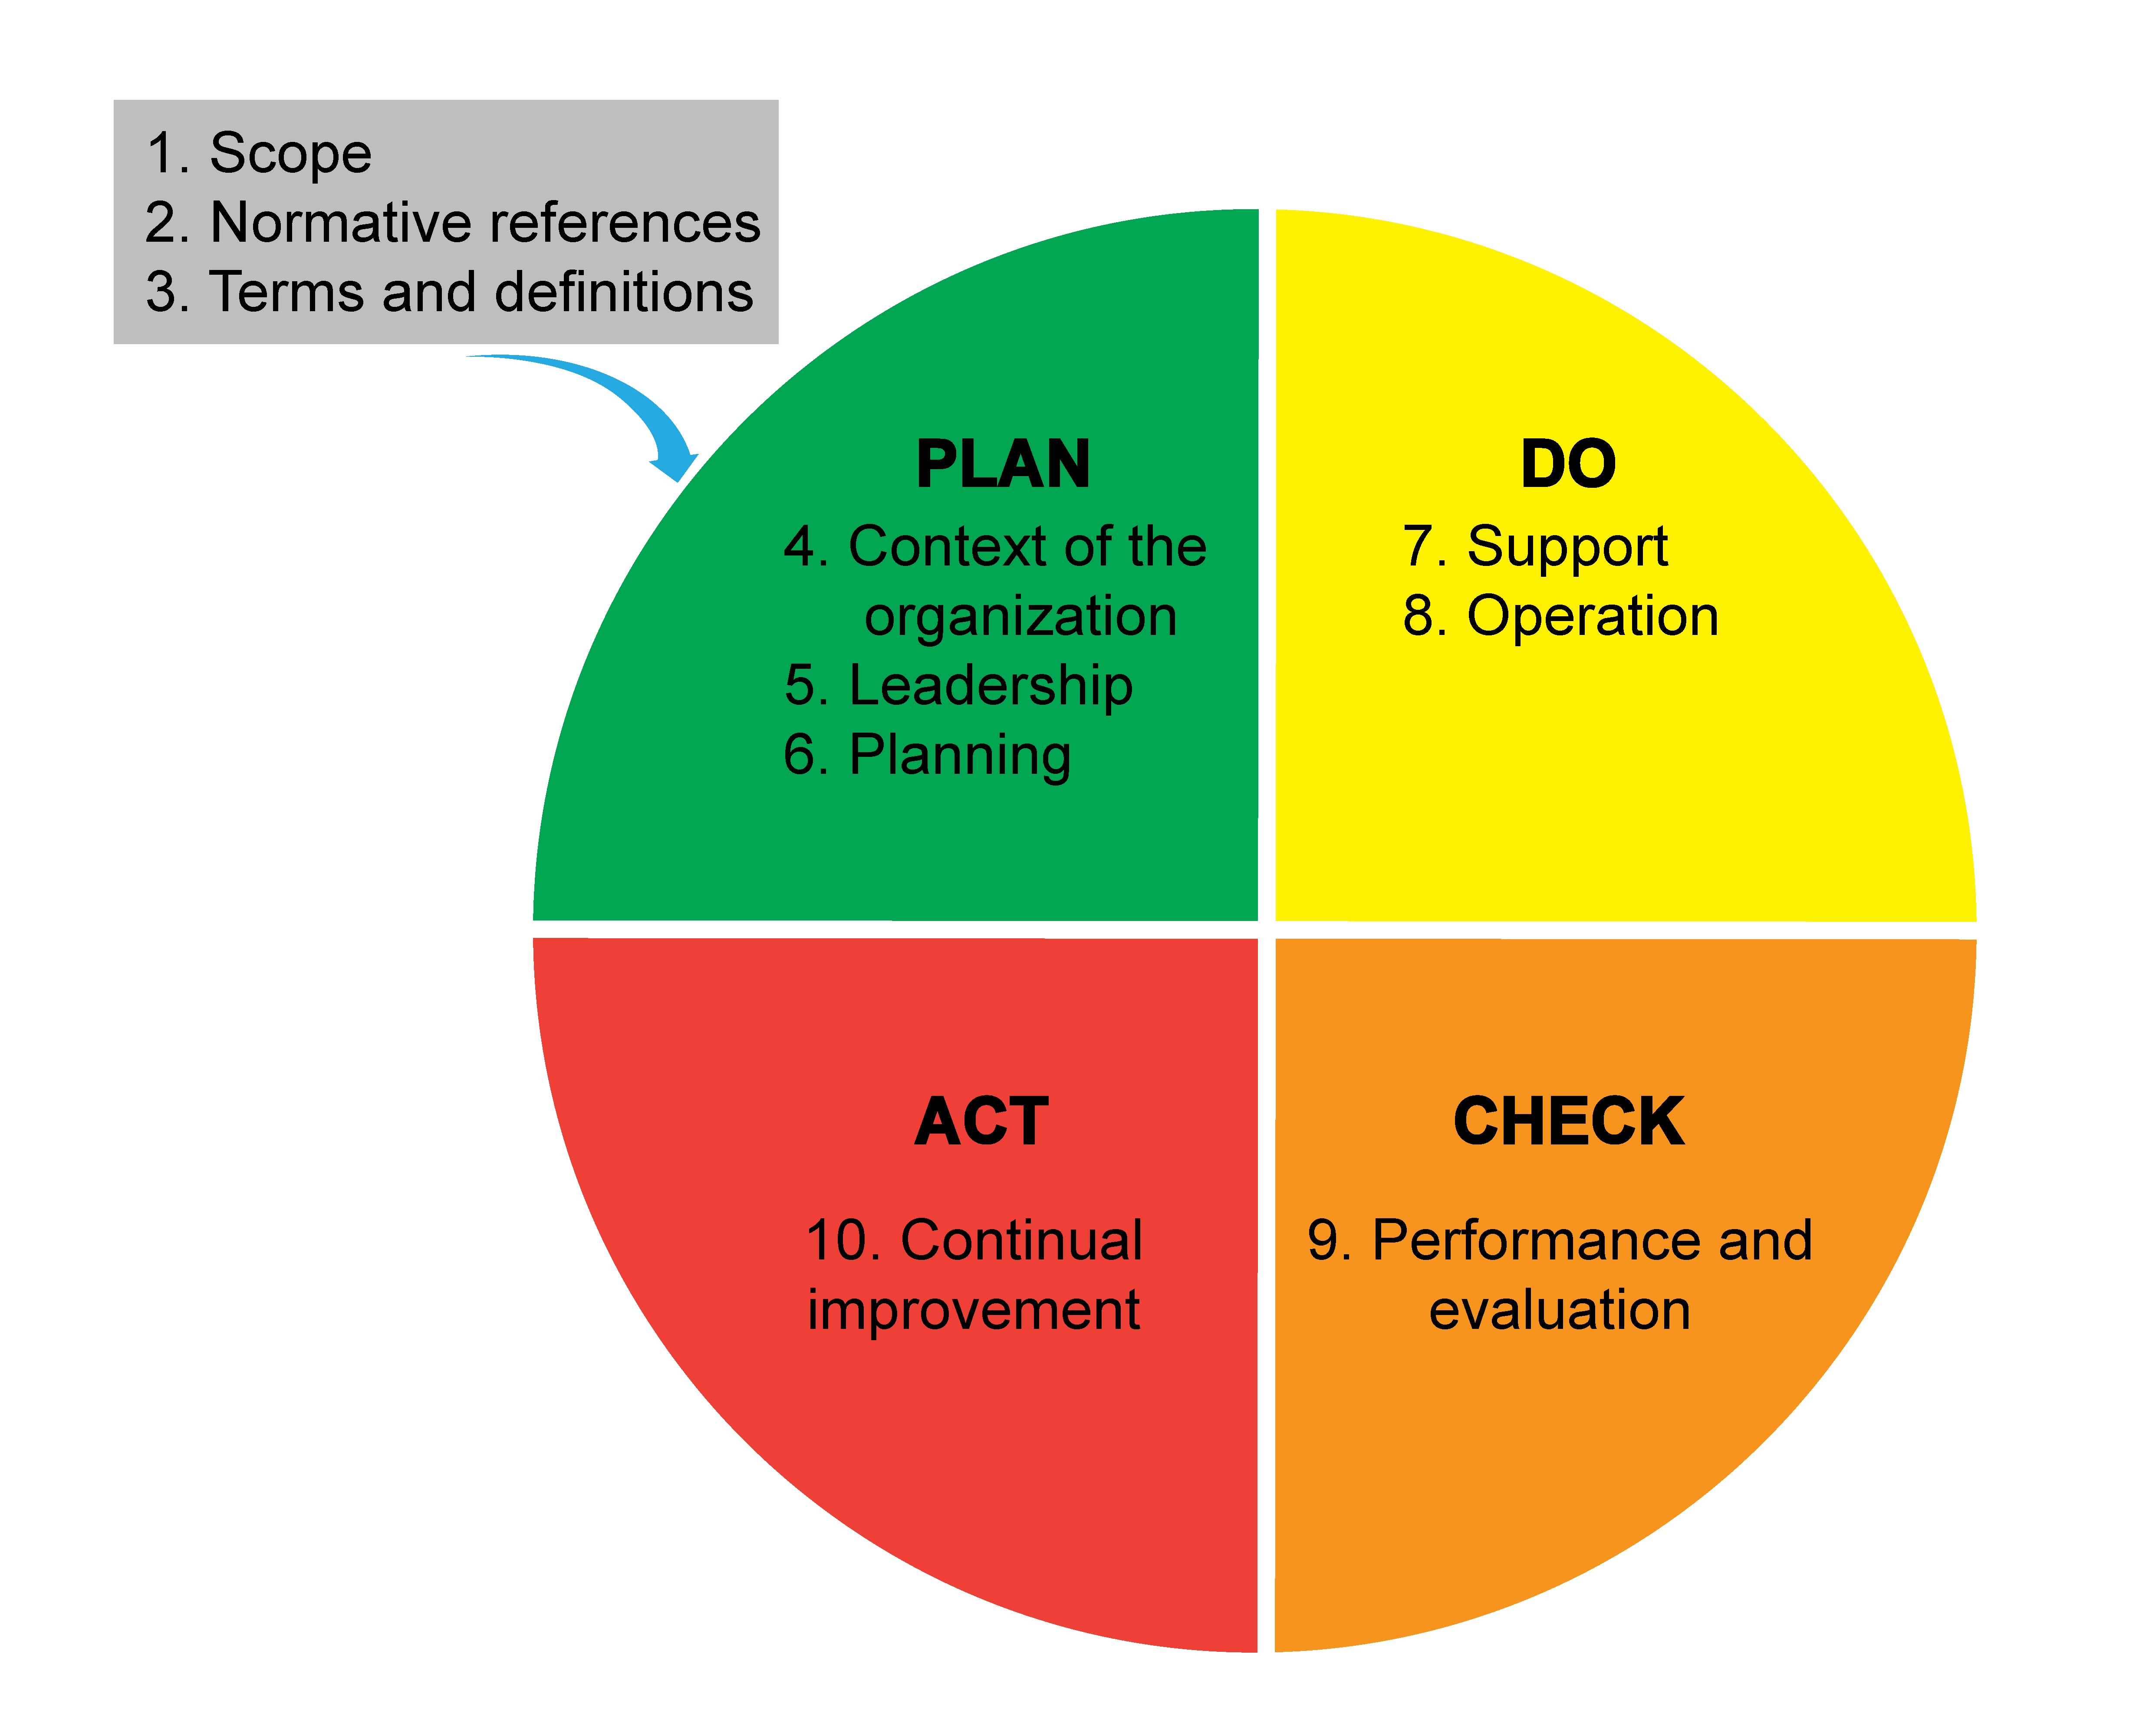 PDCA related to the 10 clauses of the ISO 9001:2015